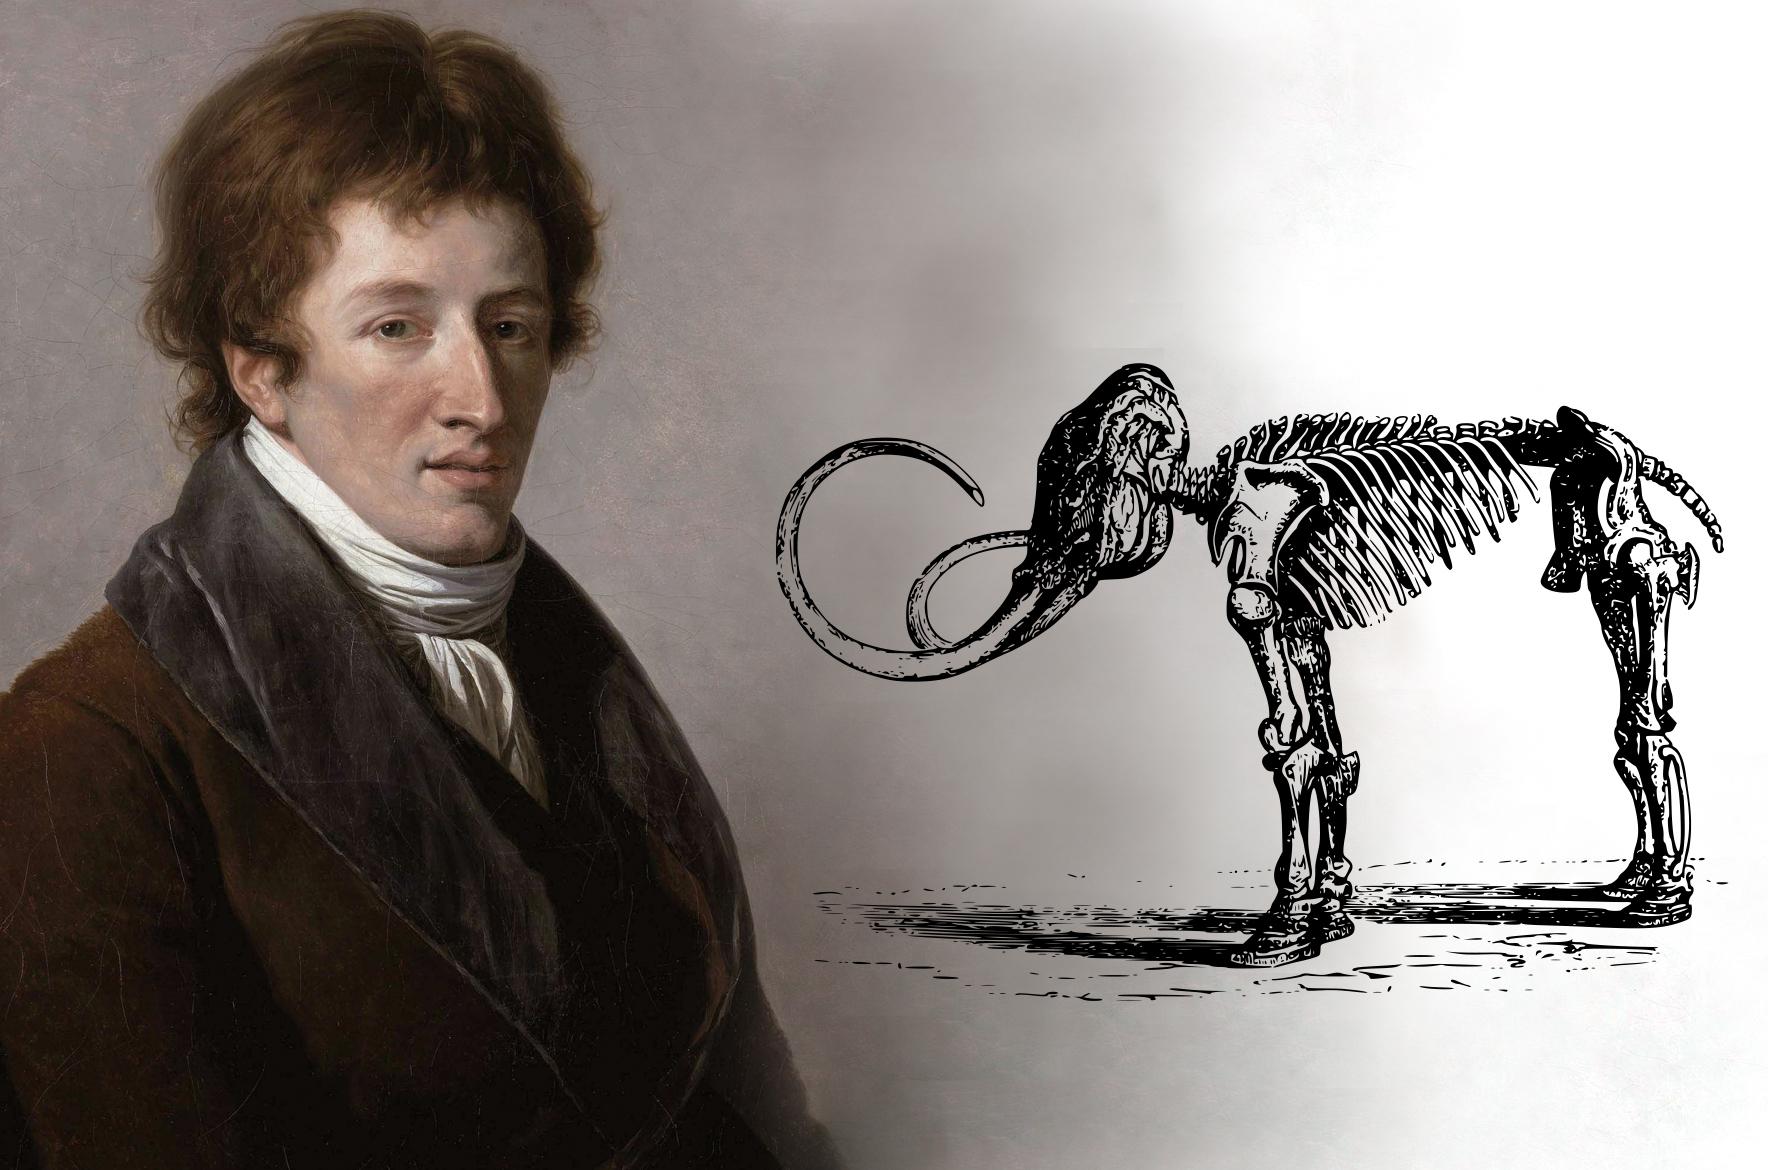 Historic painting of person with short wavy hair next to drawing of a mastodon skeleton.